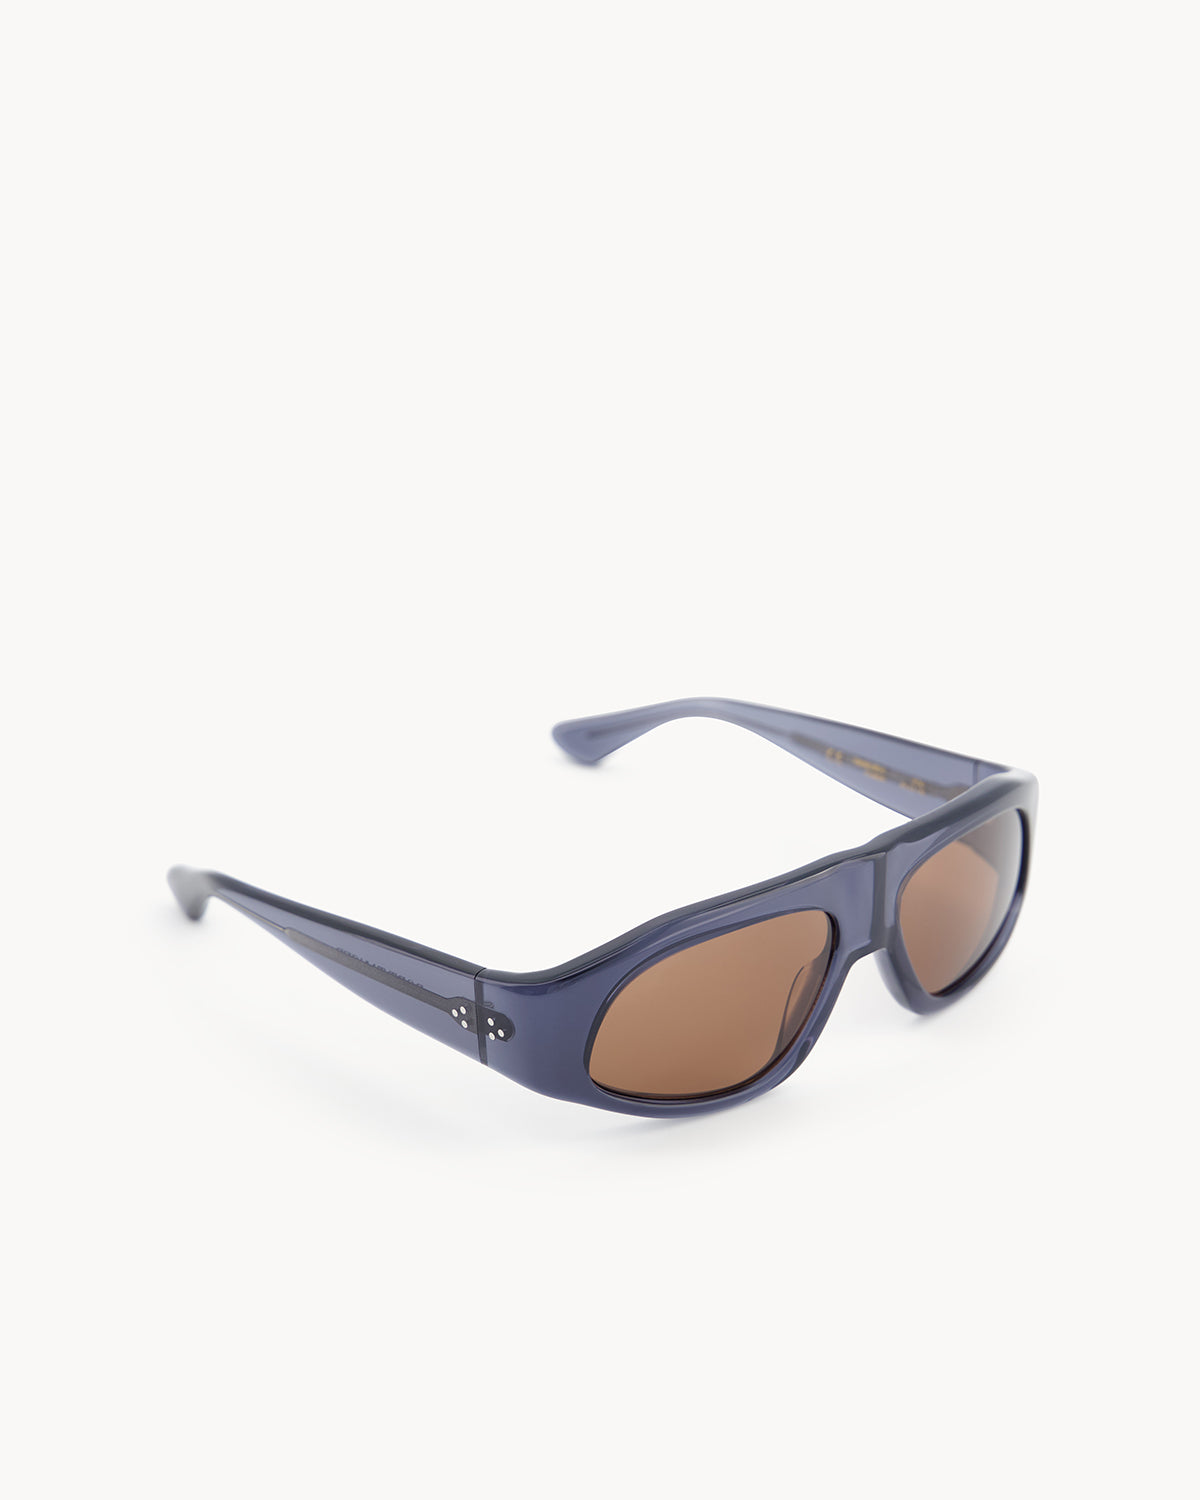 Port Tanger Irfan Sunglasses in Deep Blue Acetate and Tobacco Lenses 2